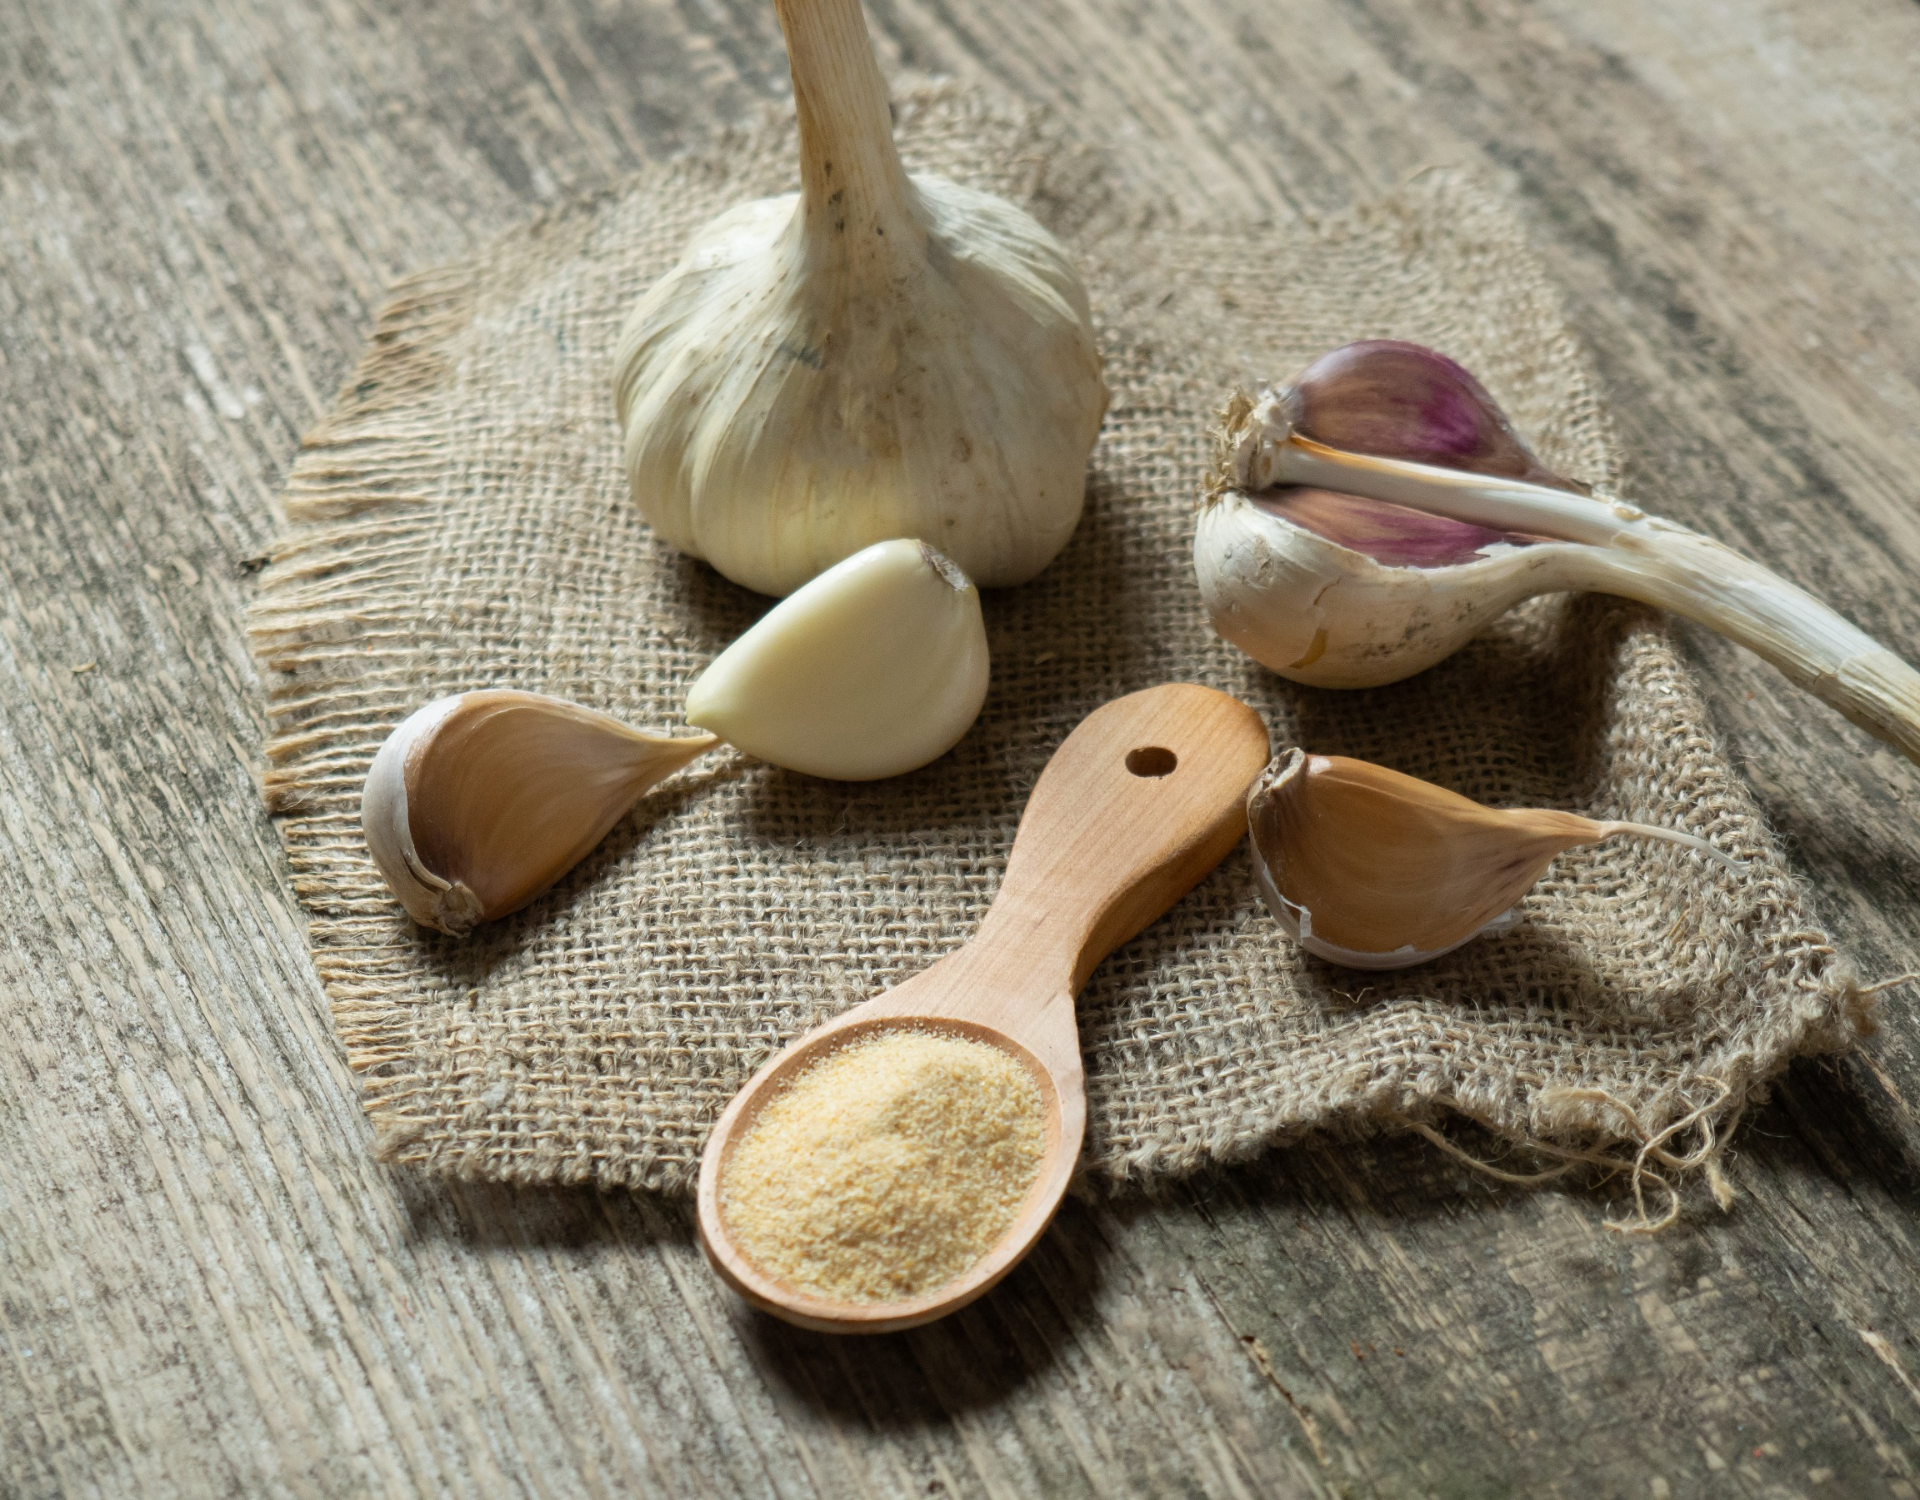 delicious-garlic-bulbs-and-cloves-with-spoonful-of-garlic-powder-on-wooden-old-table_1.jpg